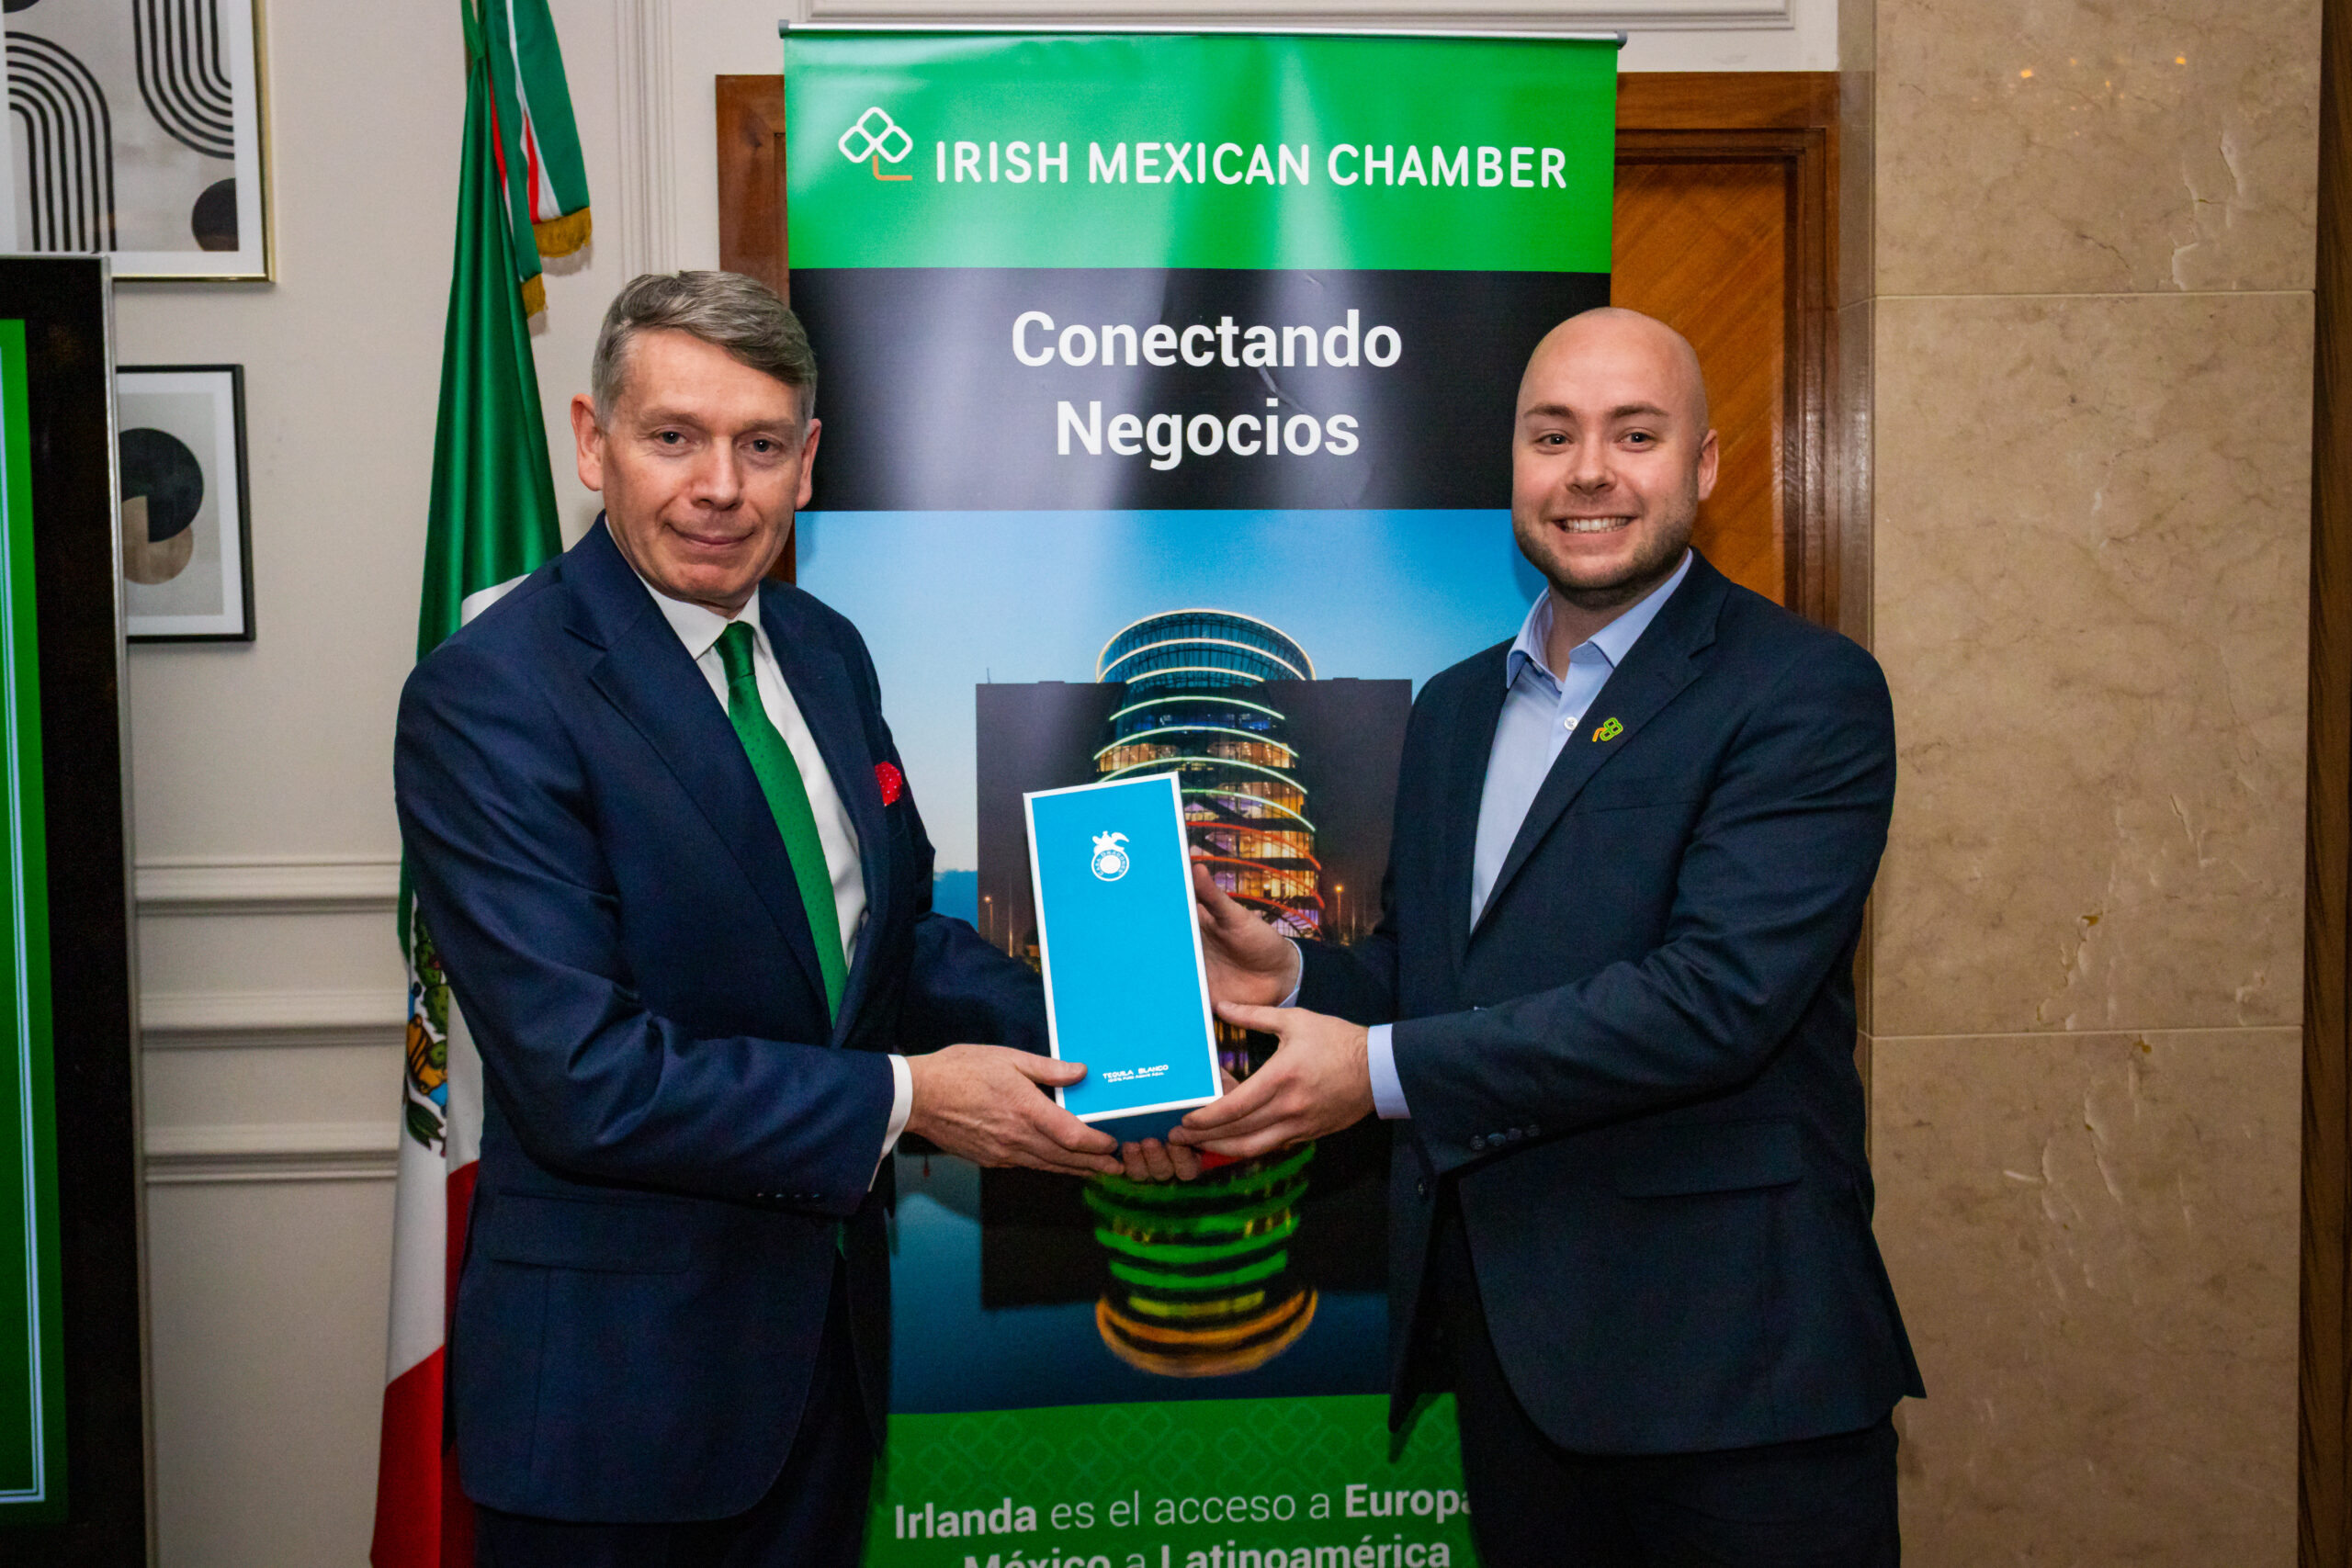 A delegation of 44 companies from the Irish-Mexican Chamber of Commerce visit Limerick this week as part of a trade mission to increase economic ties